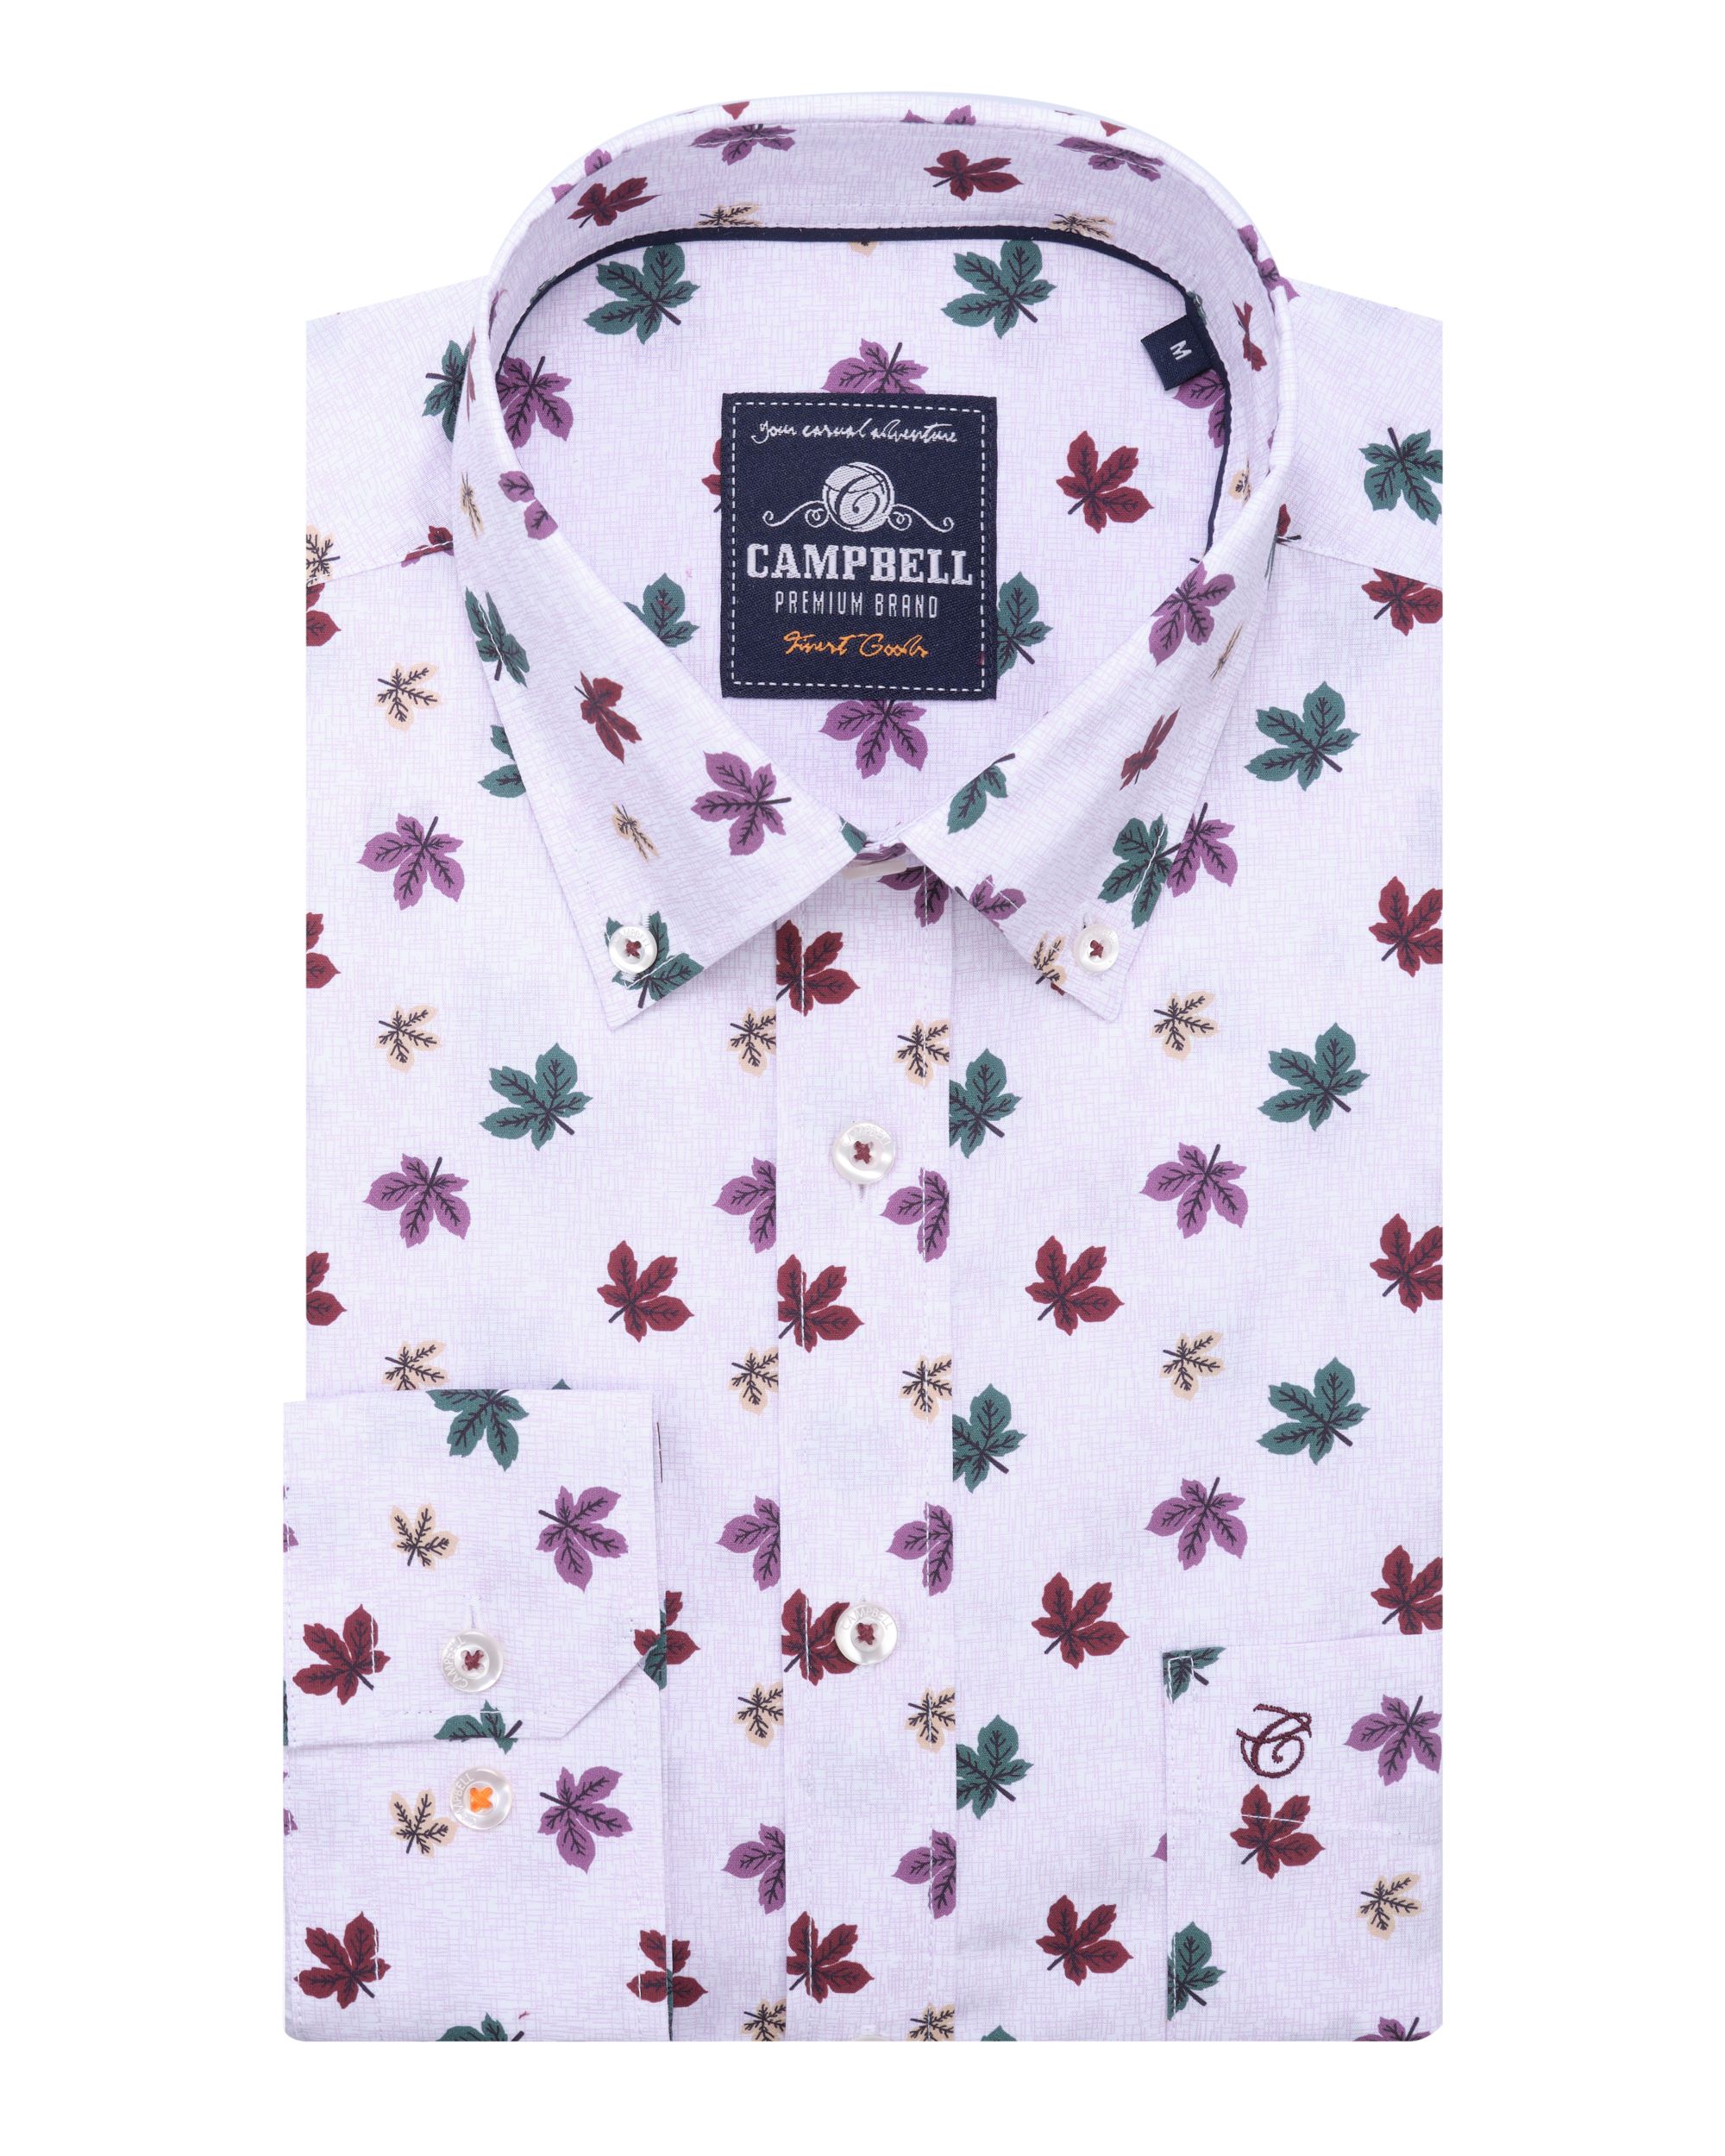 Campbell Classic Casual Overhemd LM Paars dessin 084665-002-L